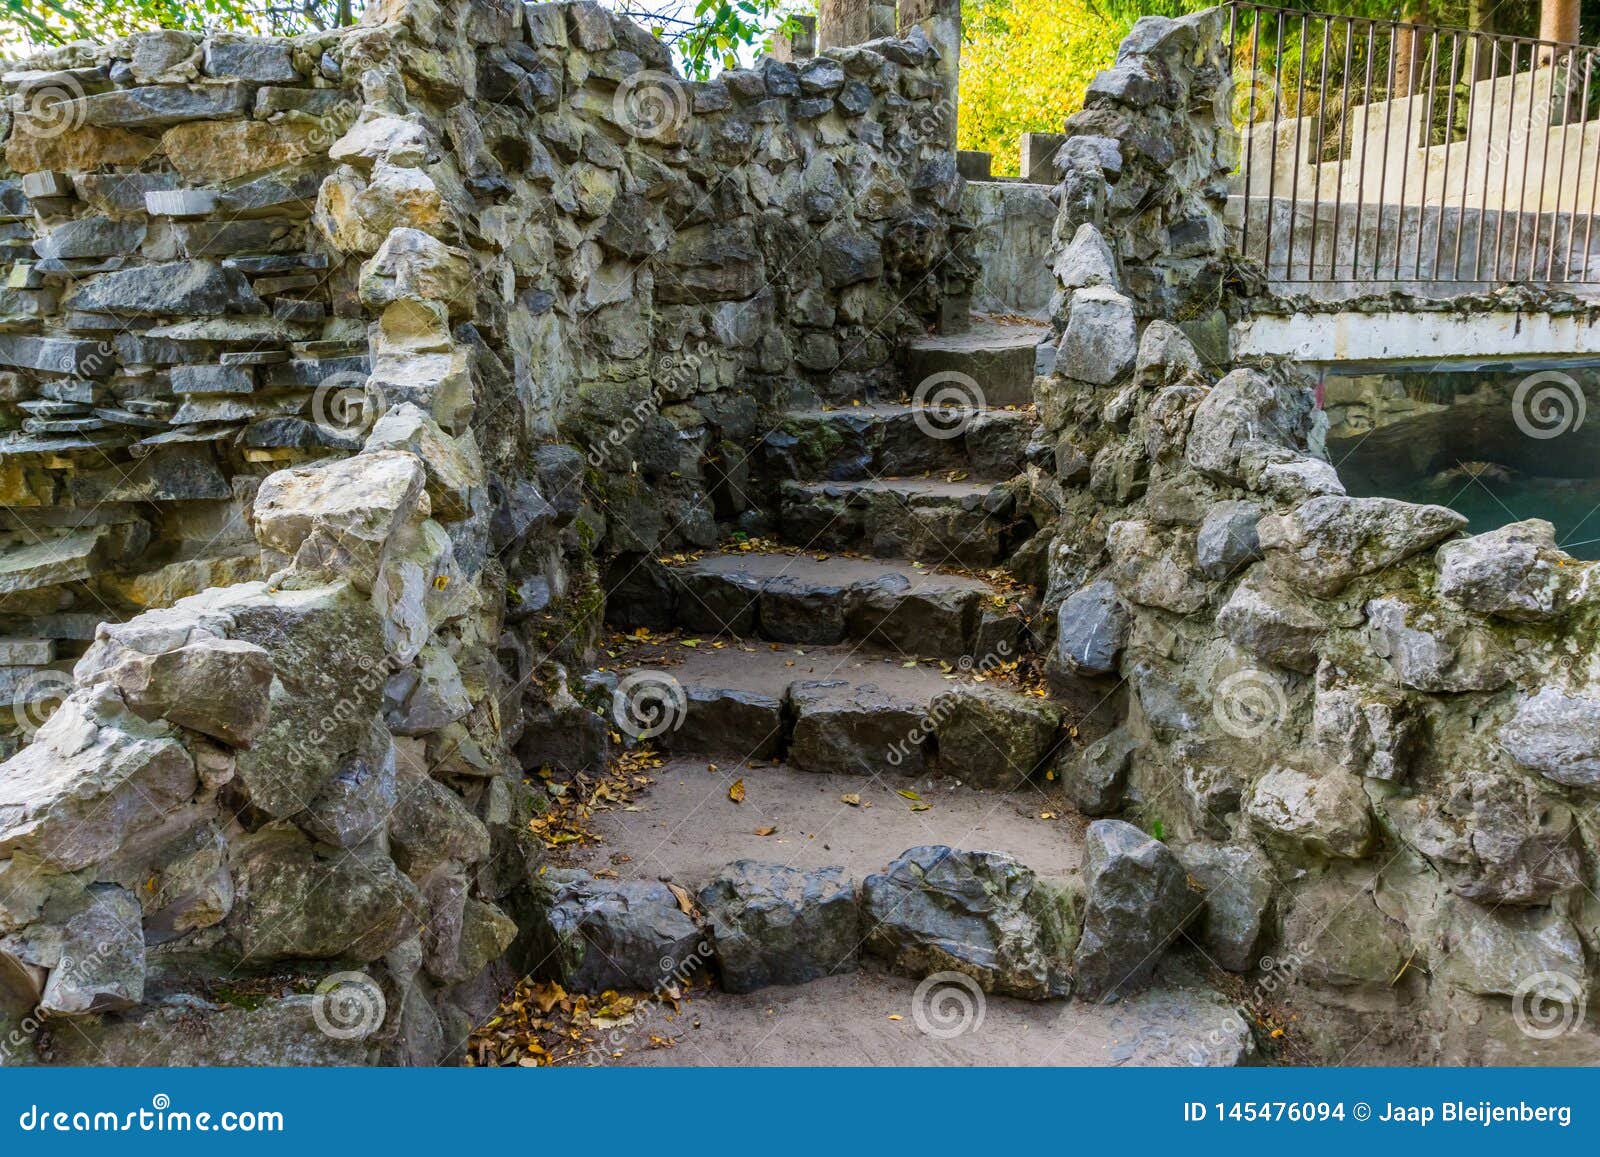 Castle Staircase with Walls Made of Rocks, Historical Looking